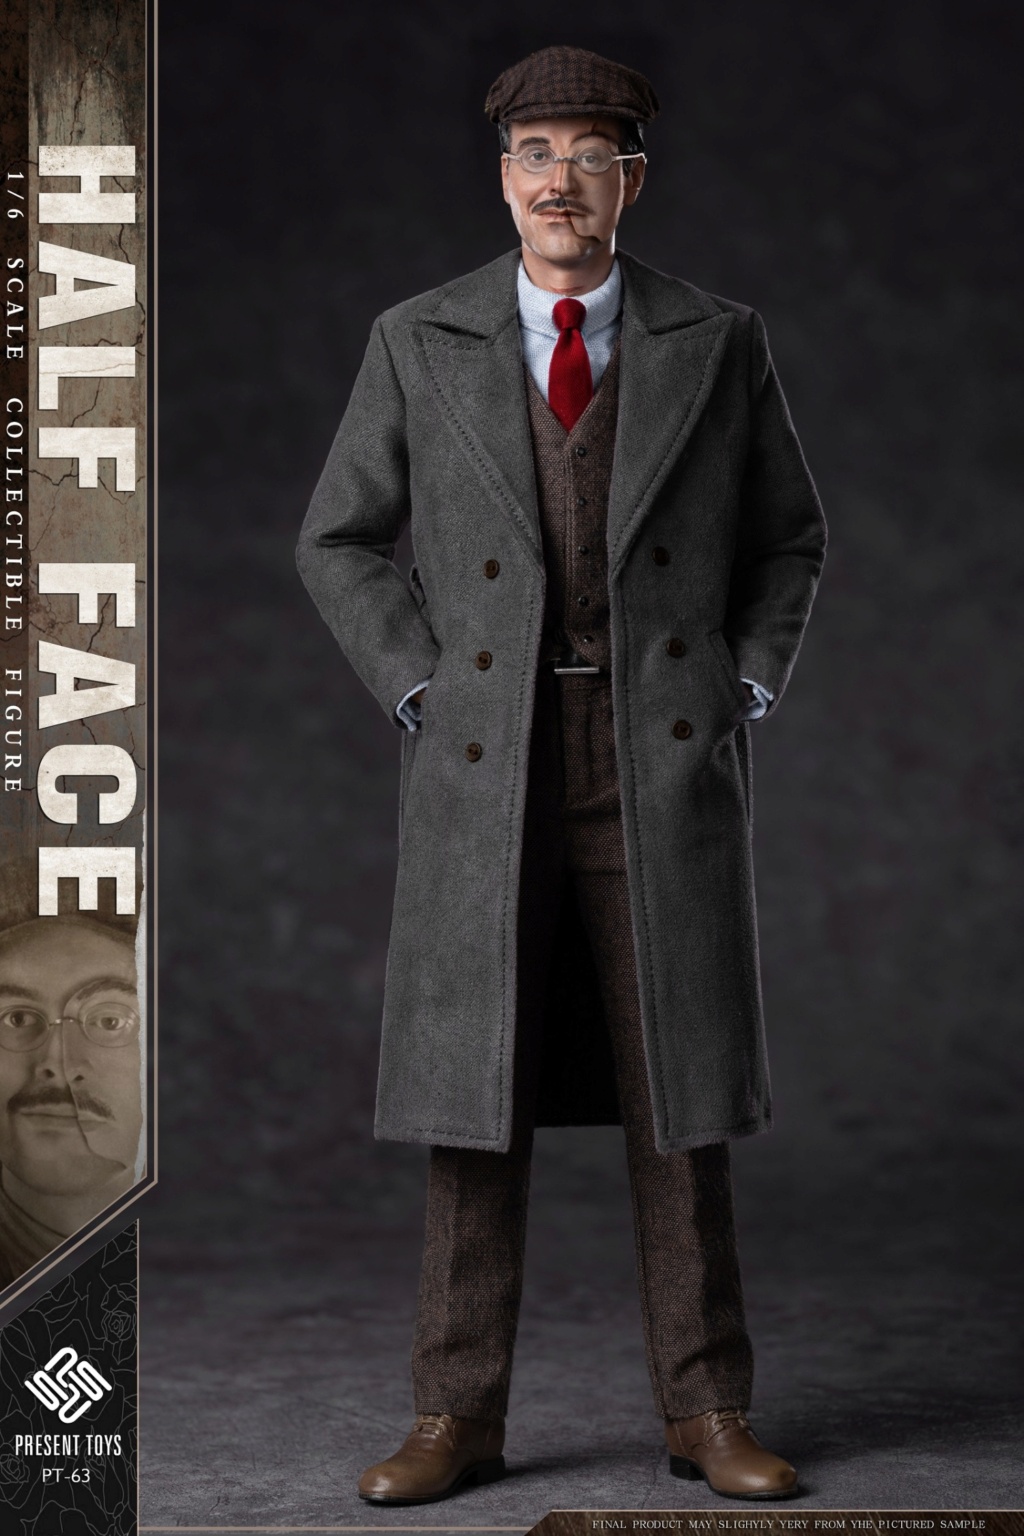 cable-based - NEW PRODUCT: PRESENT TOYS  1:6 collectiblefigure – Half Face. 19270710